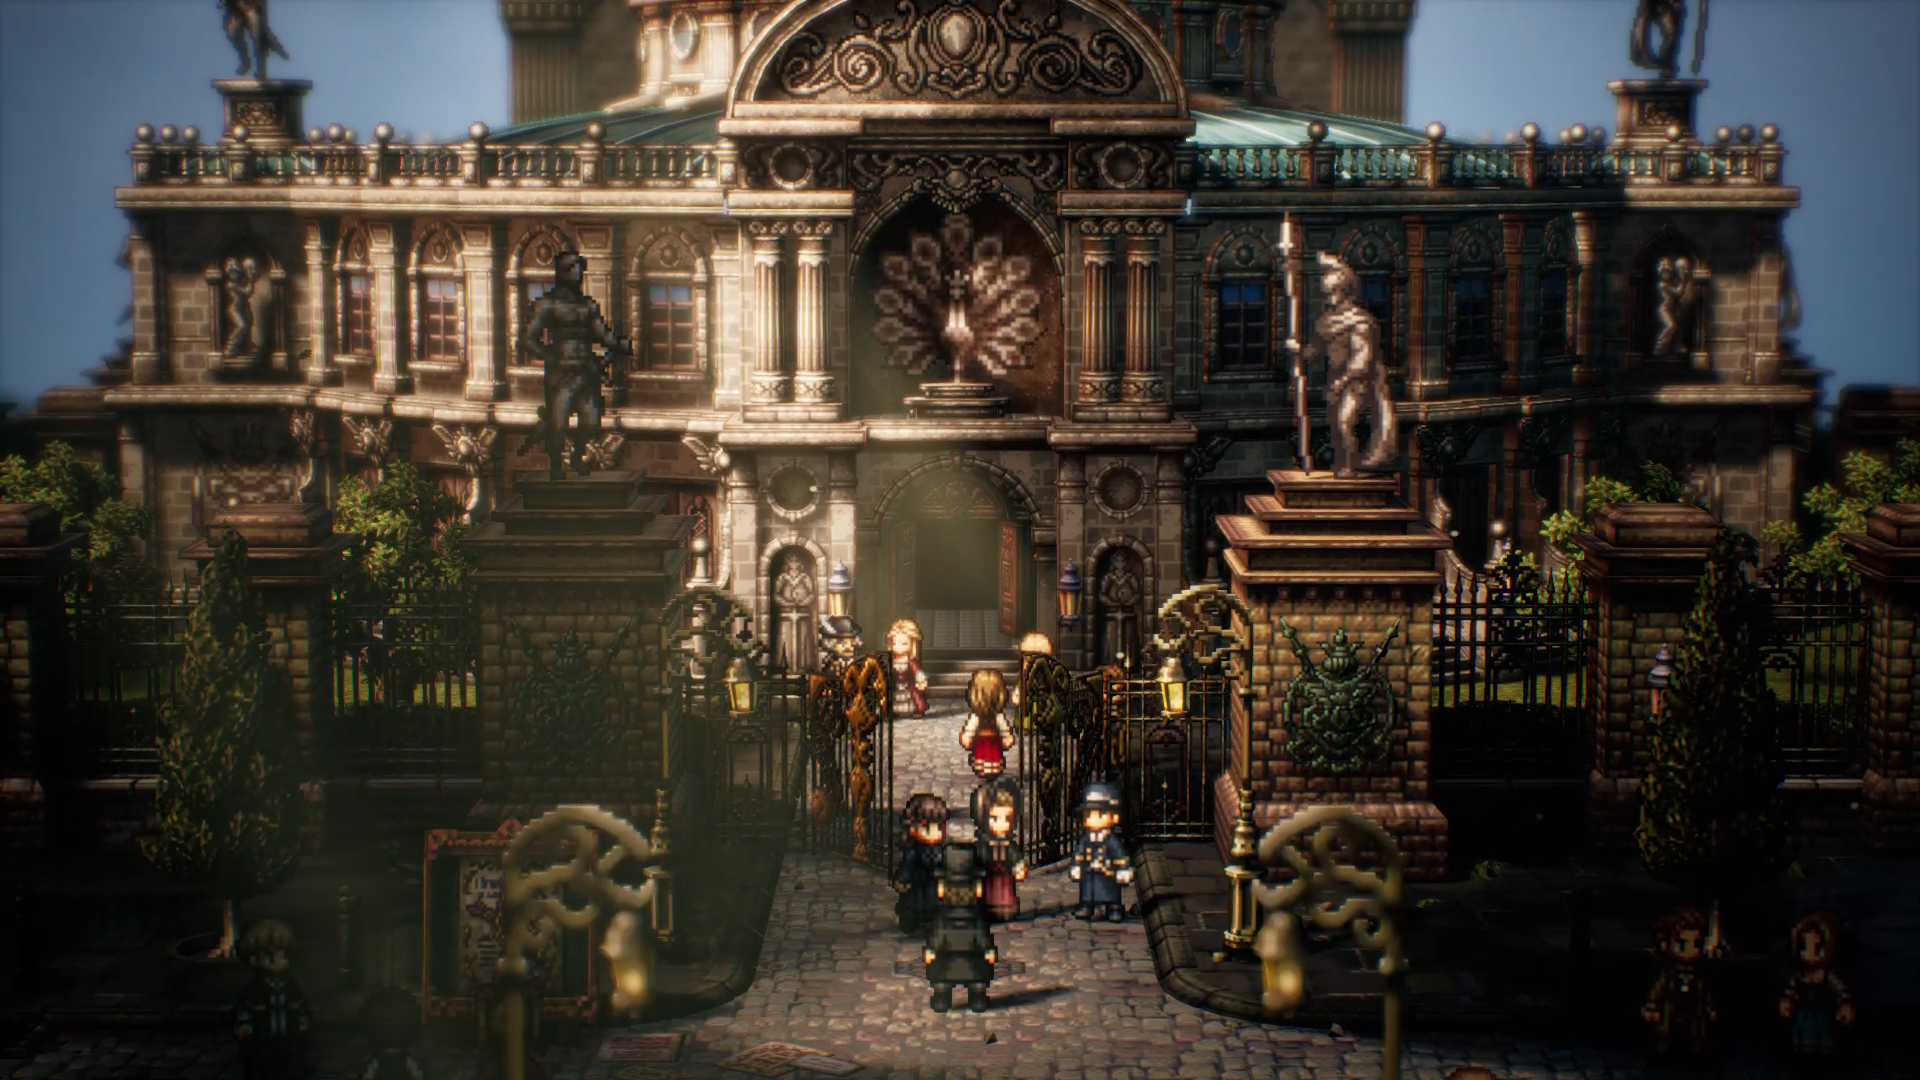 UPDATES: Octopath Traveler II Song Previews Available